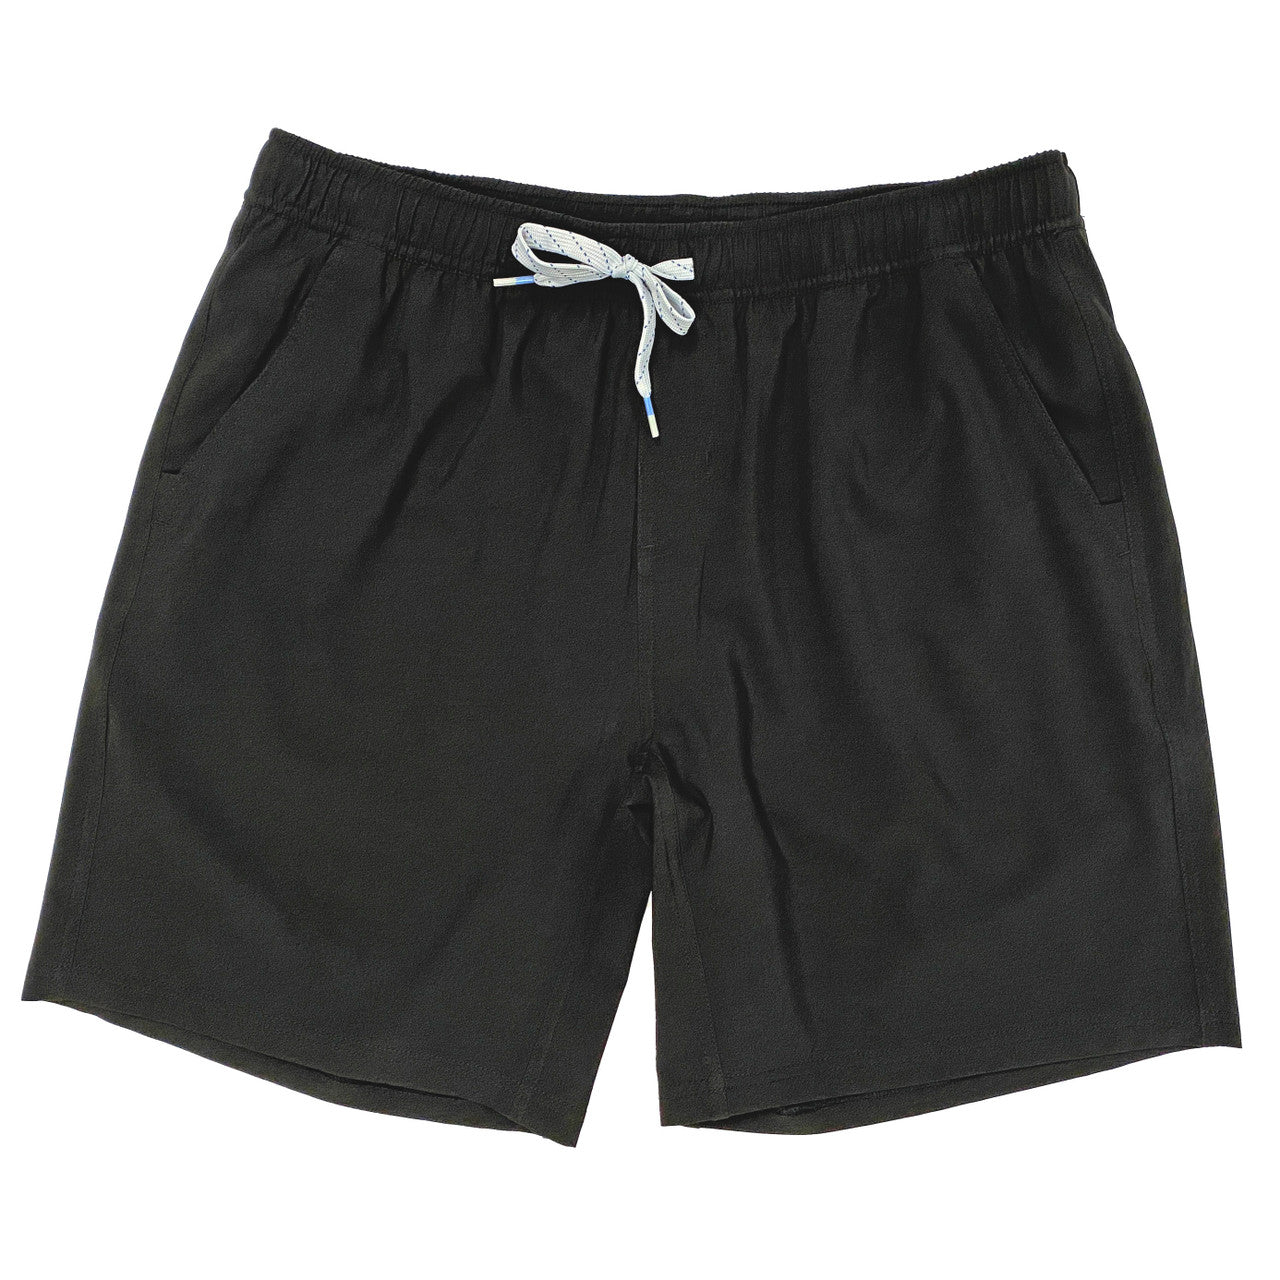 Navy Blue Lined Performance Workout Shorts